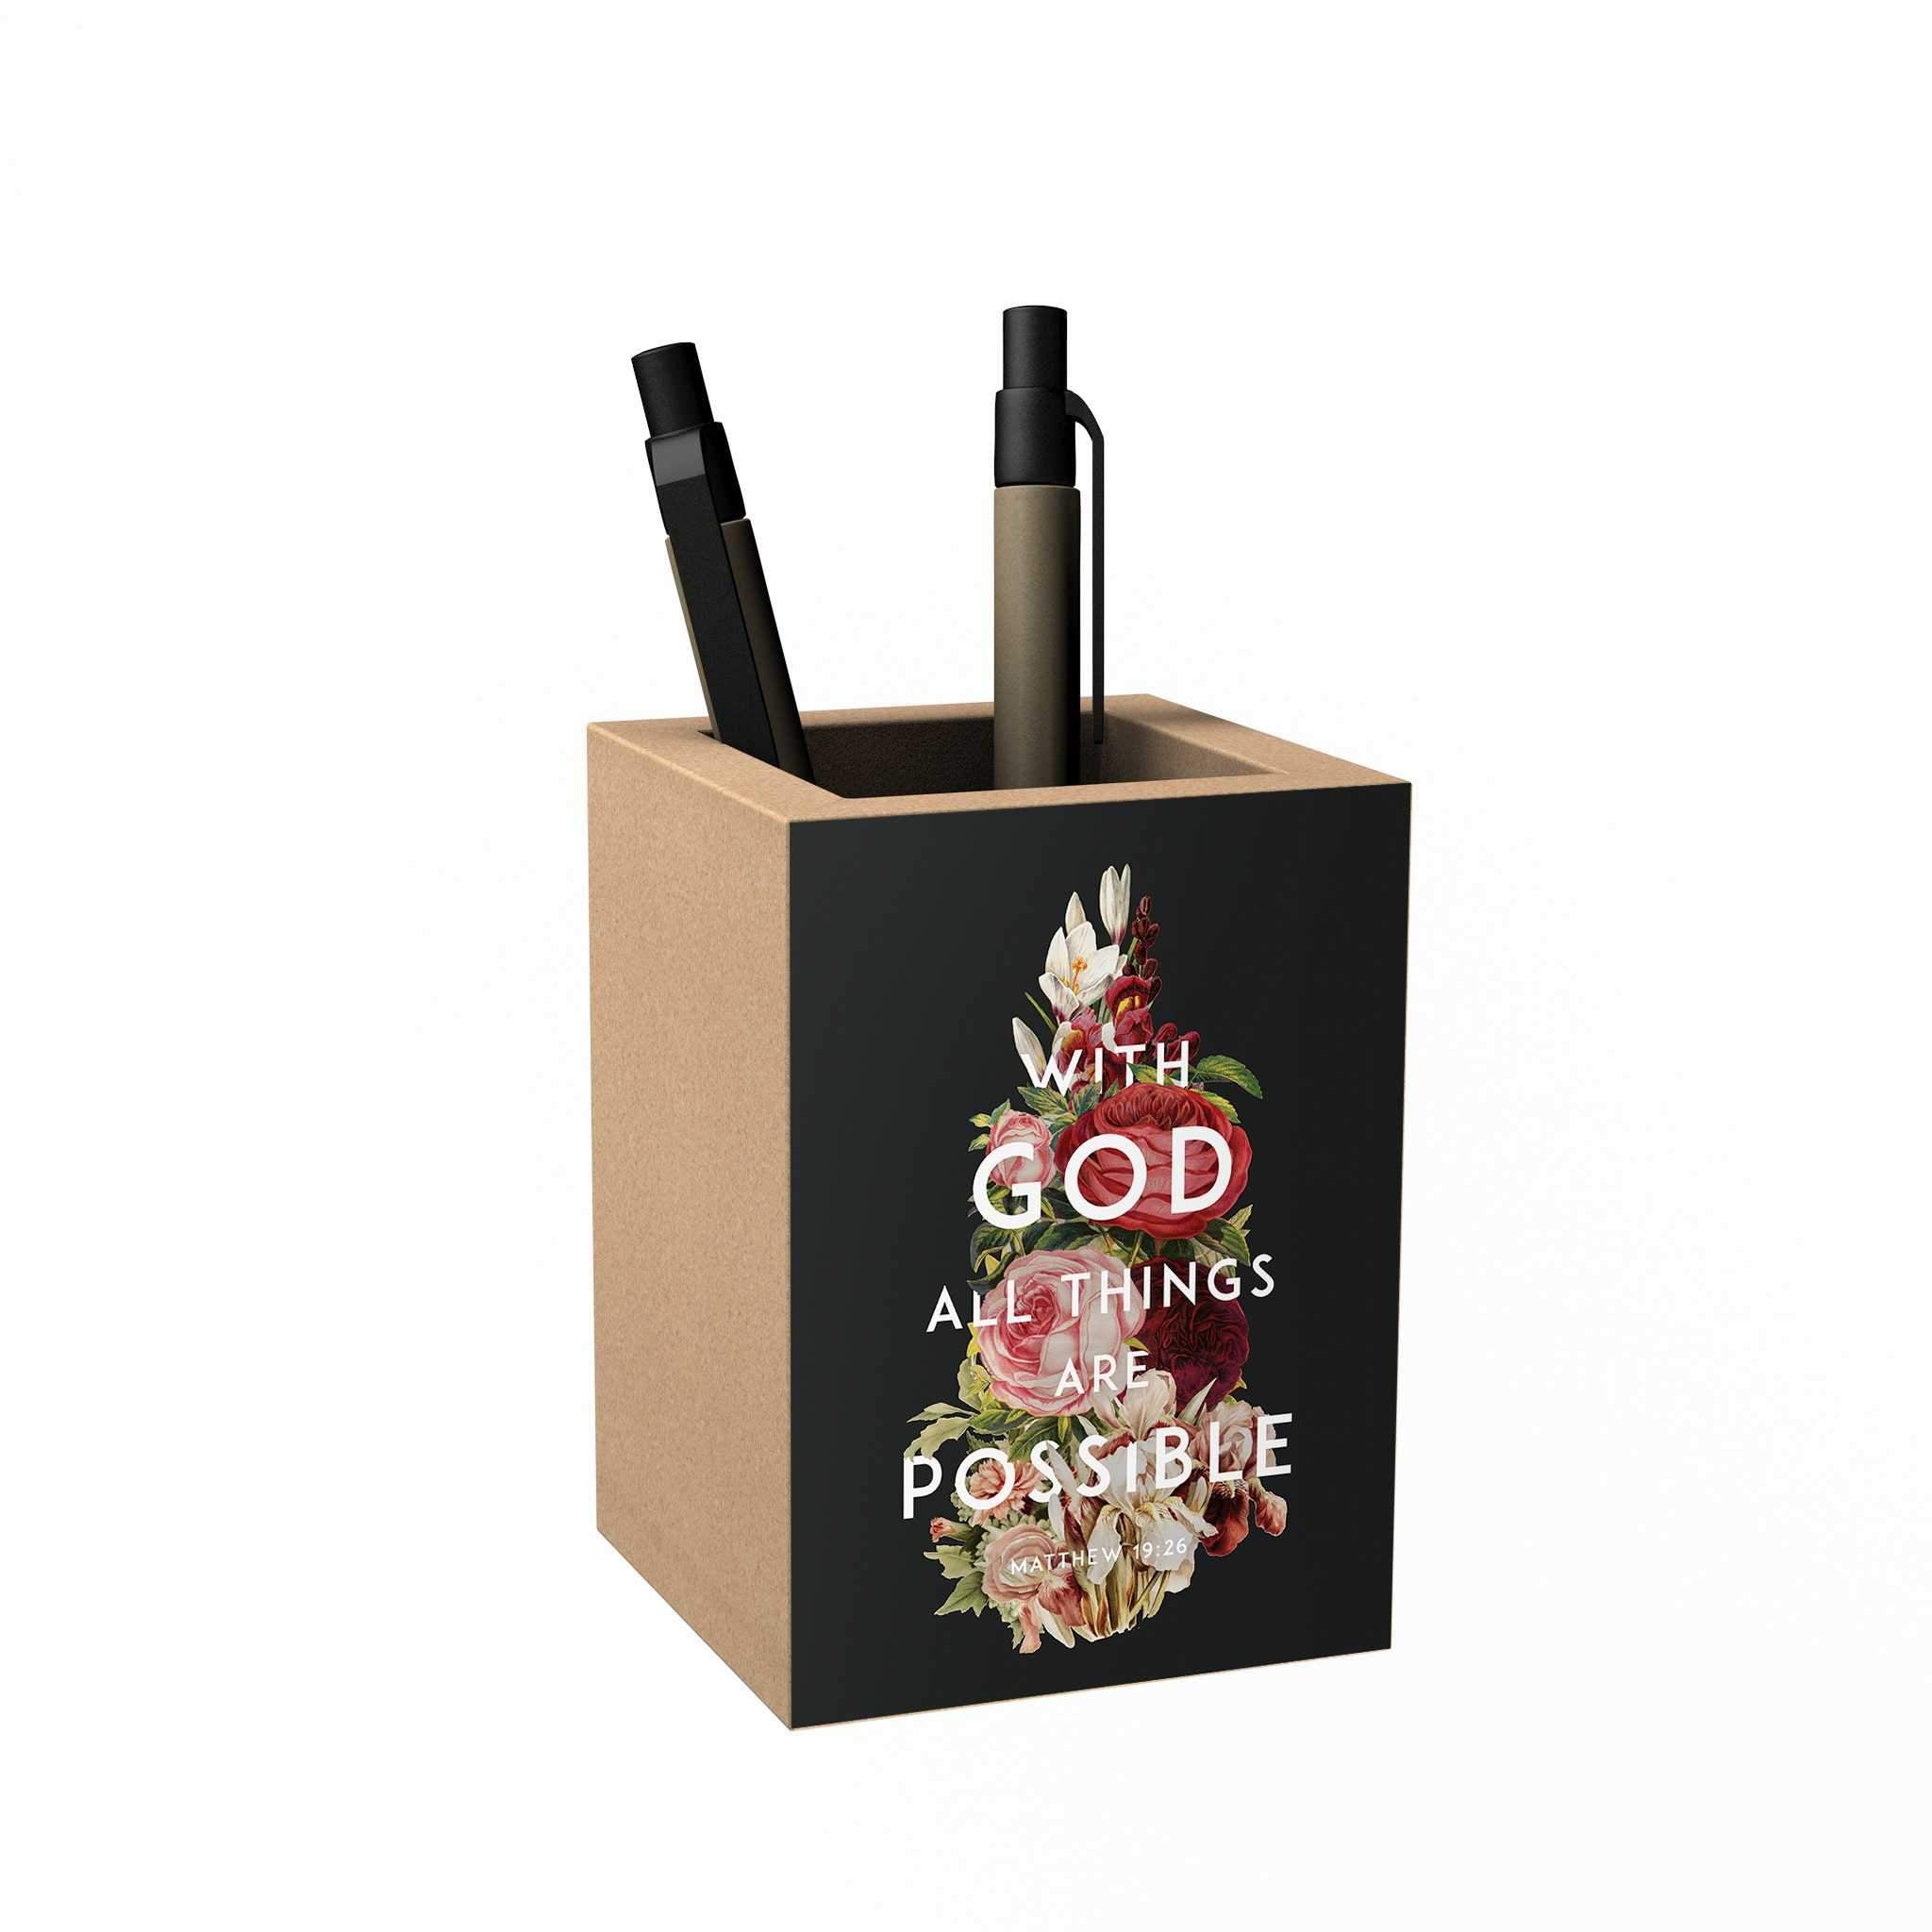 god-s-garden-with-god-all-things-are-possible-wooden-penholder